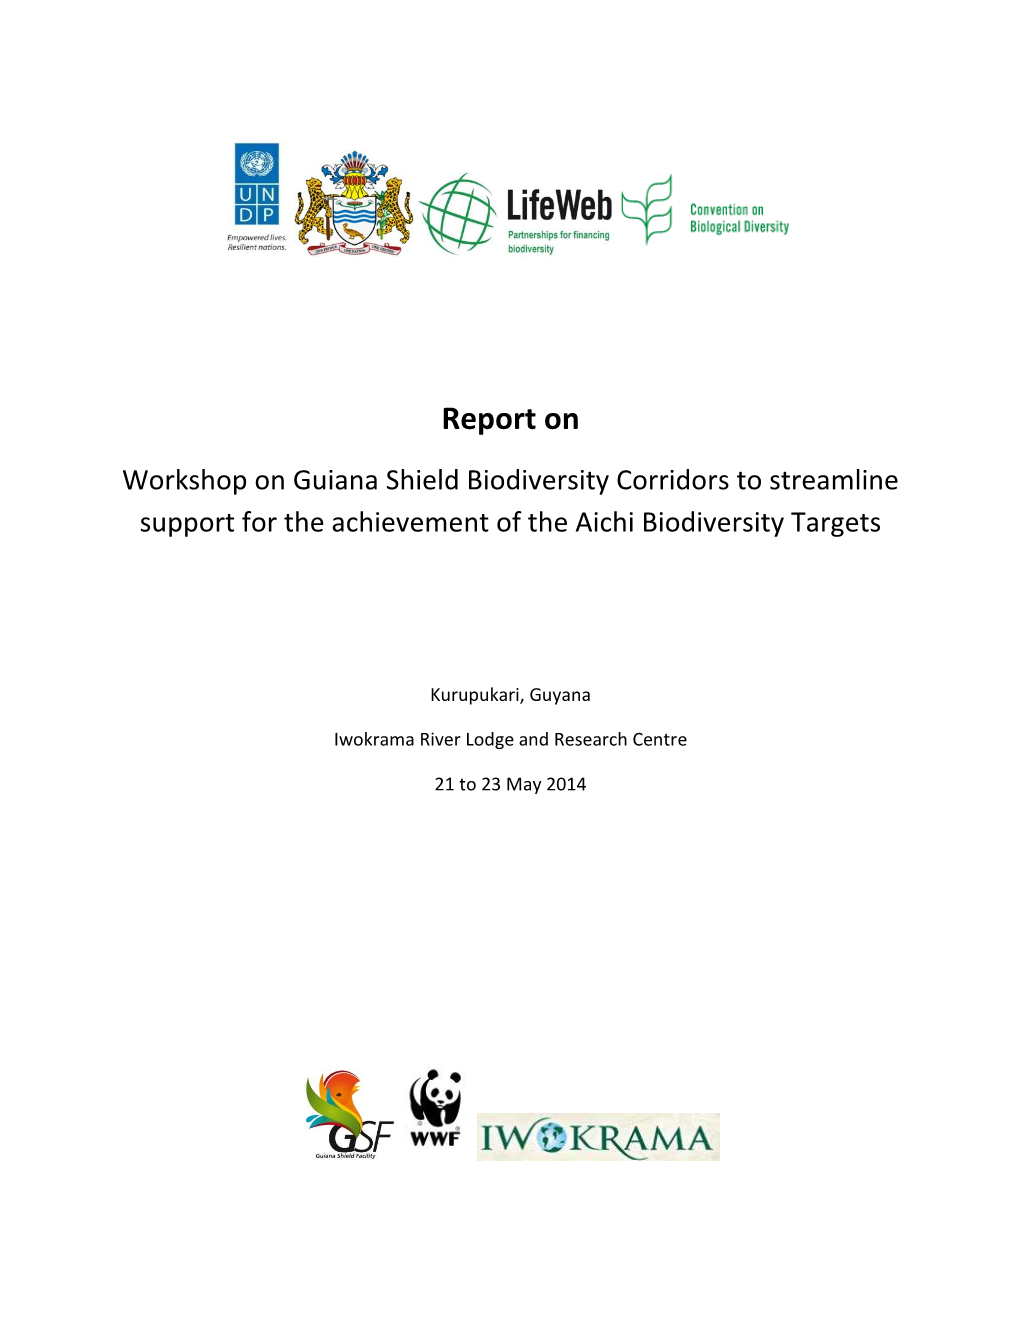 Report on Workshop on Guiana Shield Biodiversity Corridors to Streamline Support for the Achievement of the Aichi Biodiversity Targets